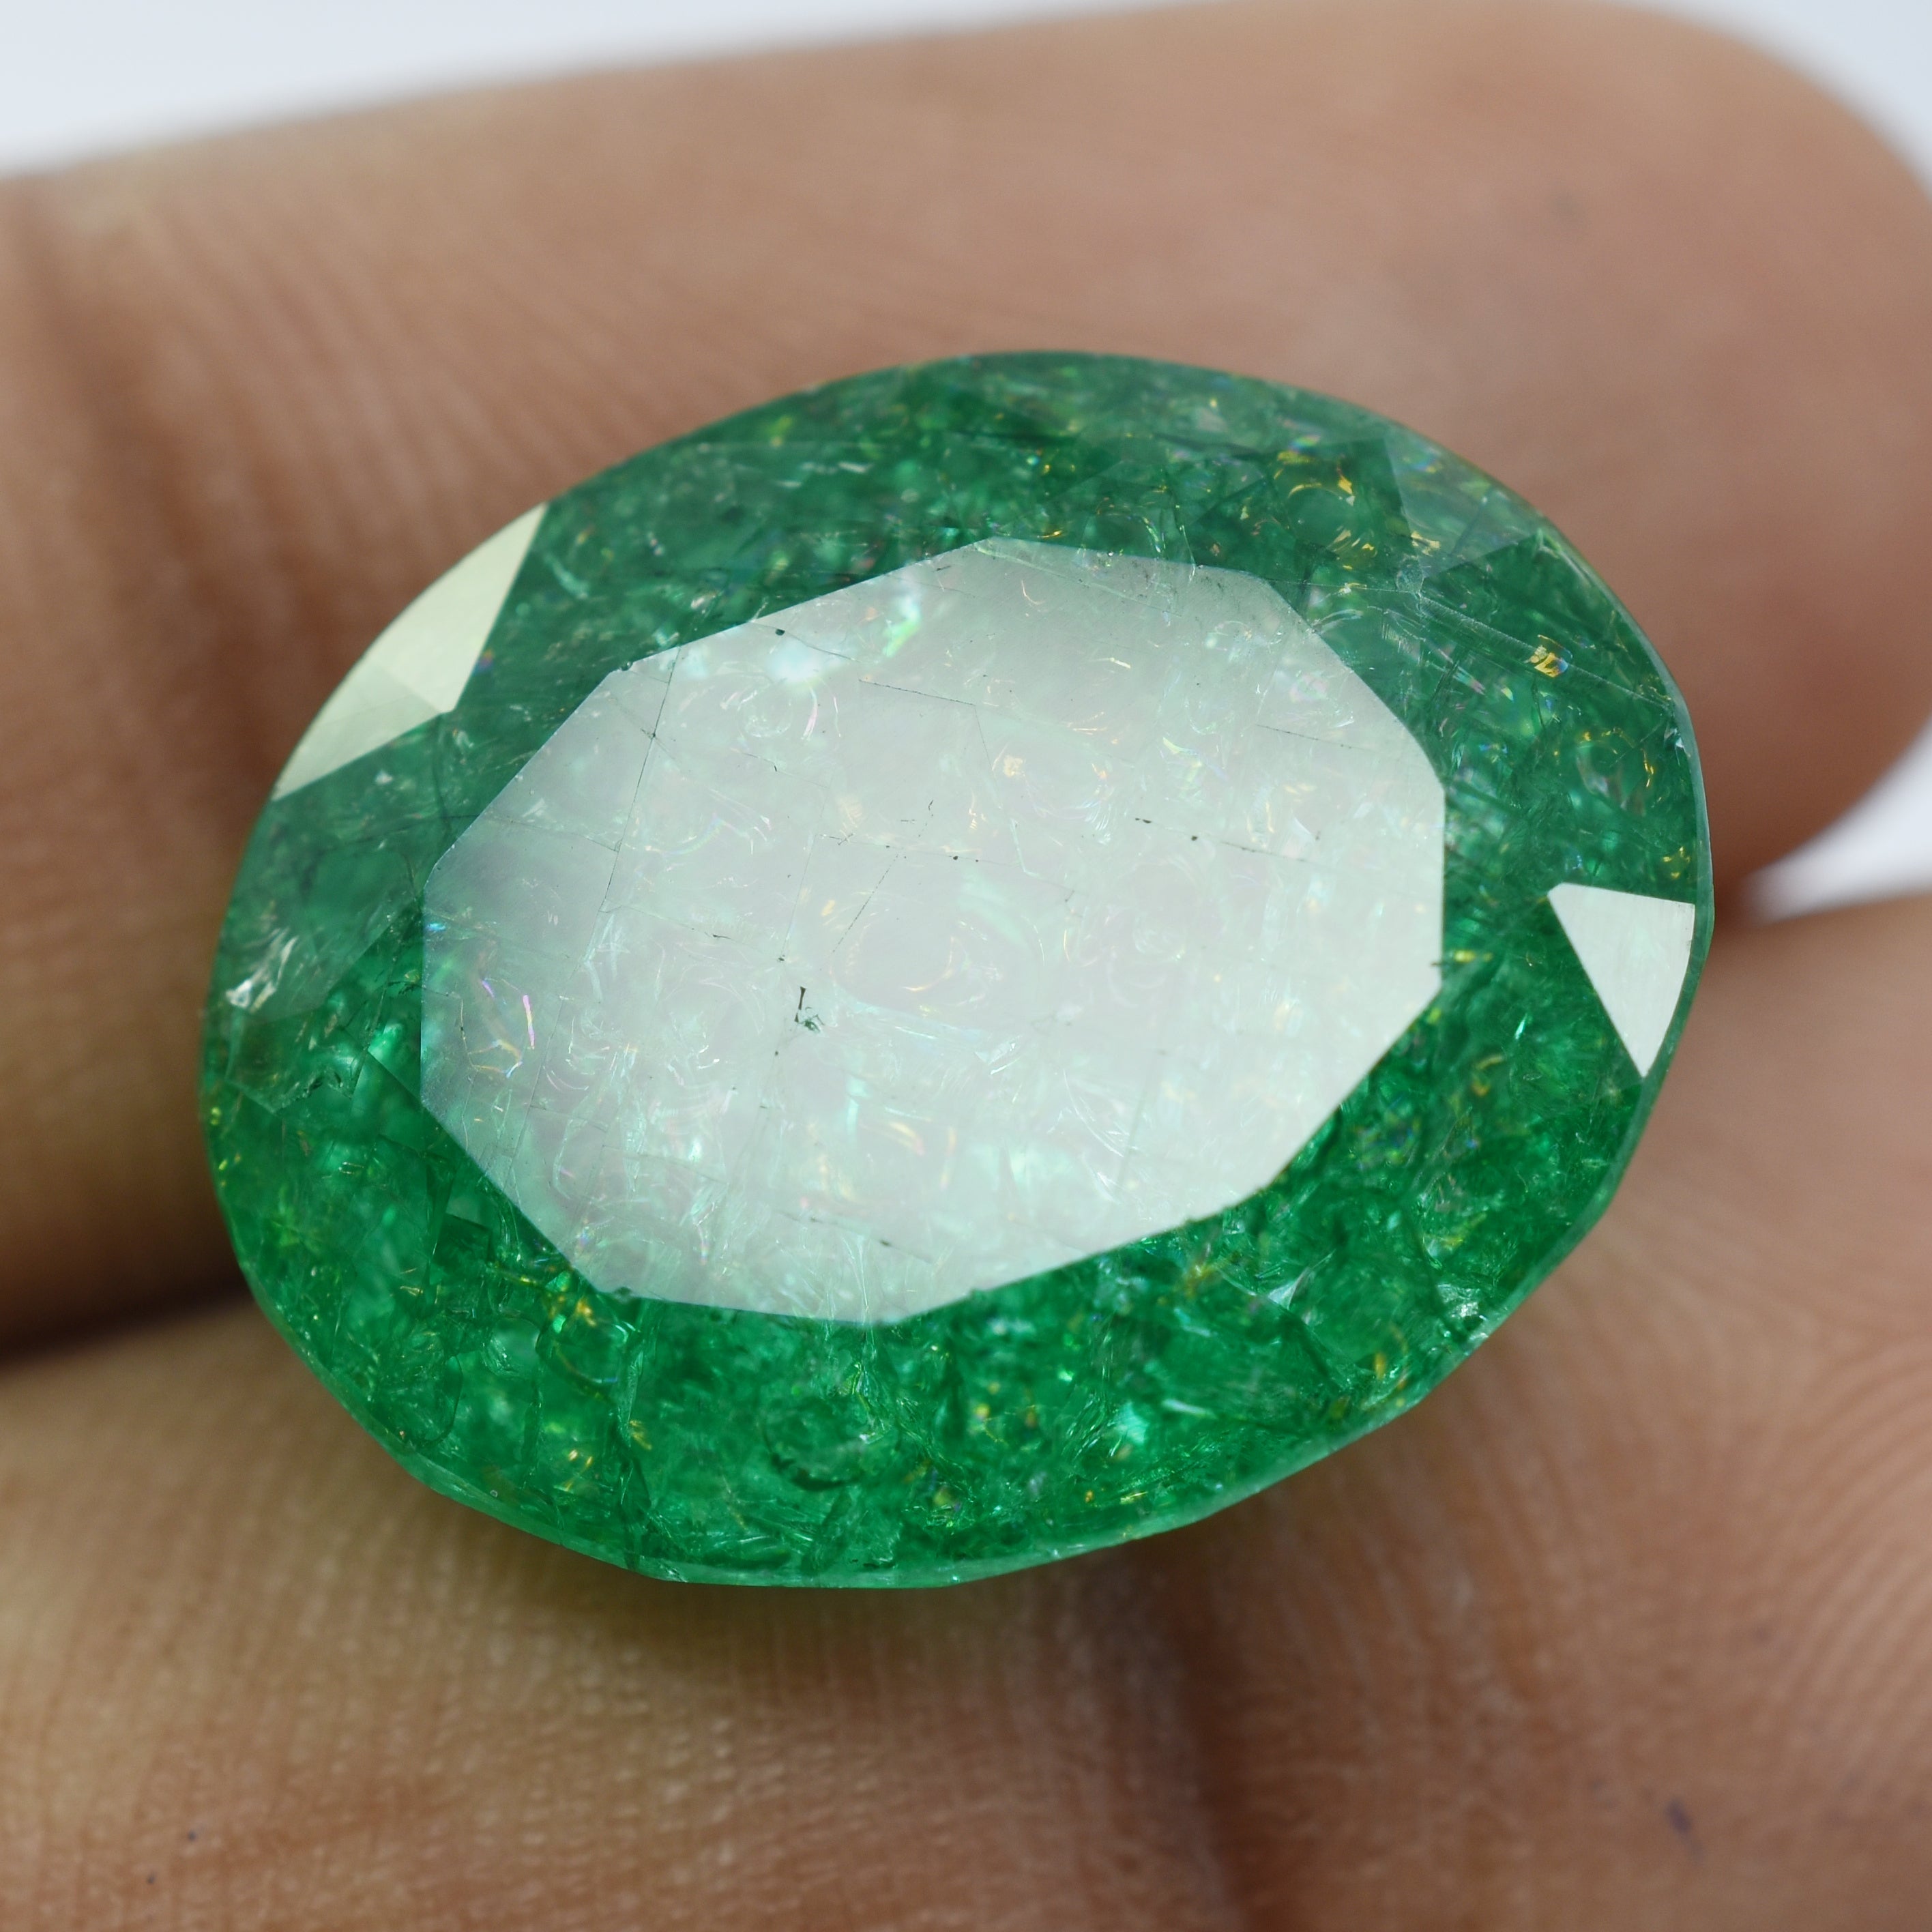 Wonderful Natural Certified Colombian Emerald Green !! 8.23 Ct Oval Shape Loose Gemstone Best Ring Size || Free Standard Delivery With Free Gift || Gift For Her/him